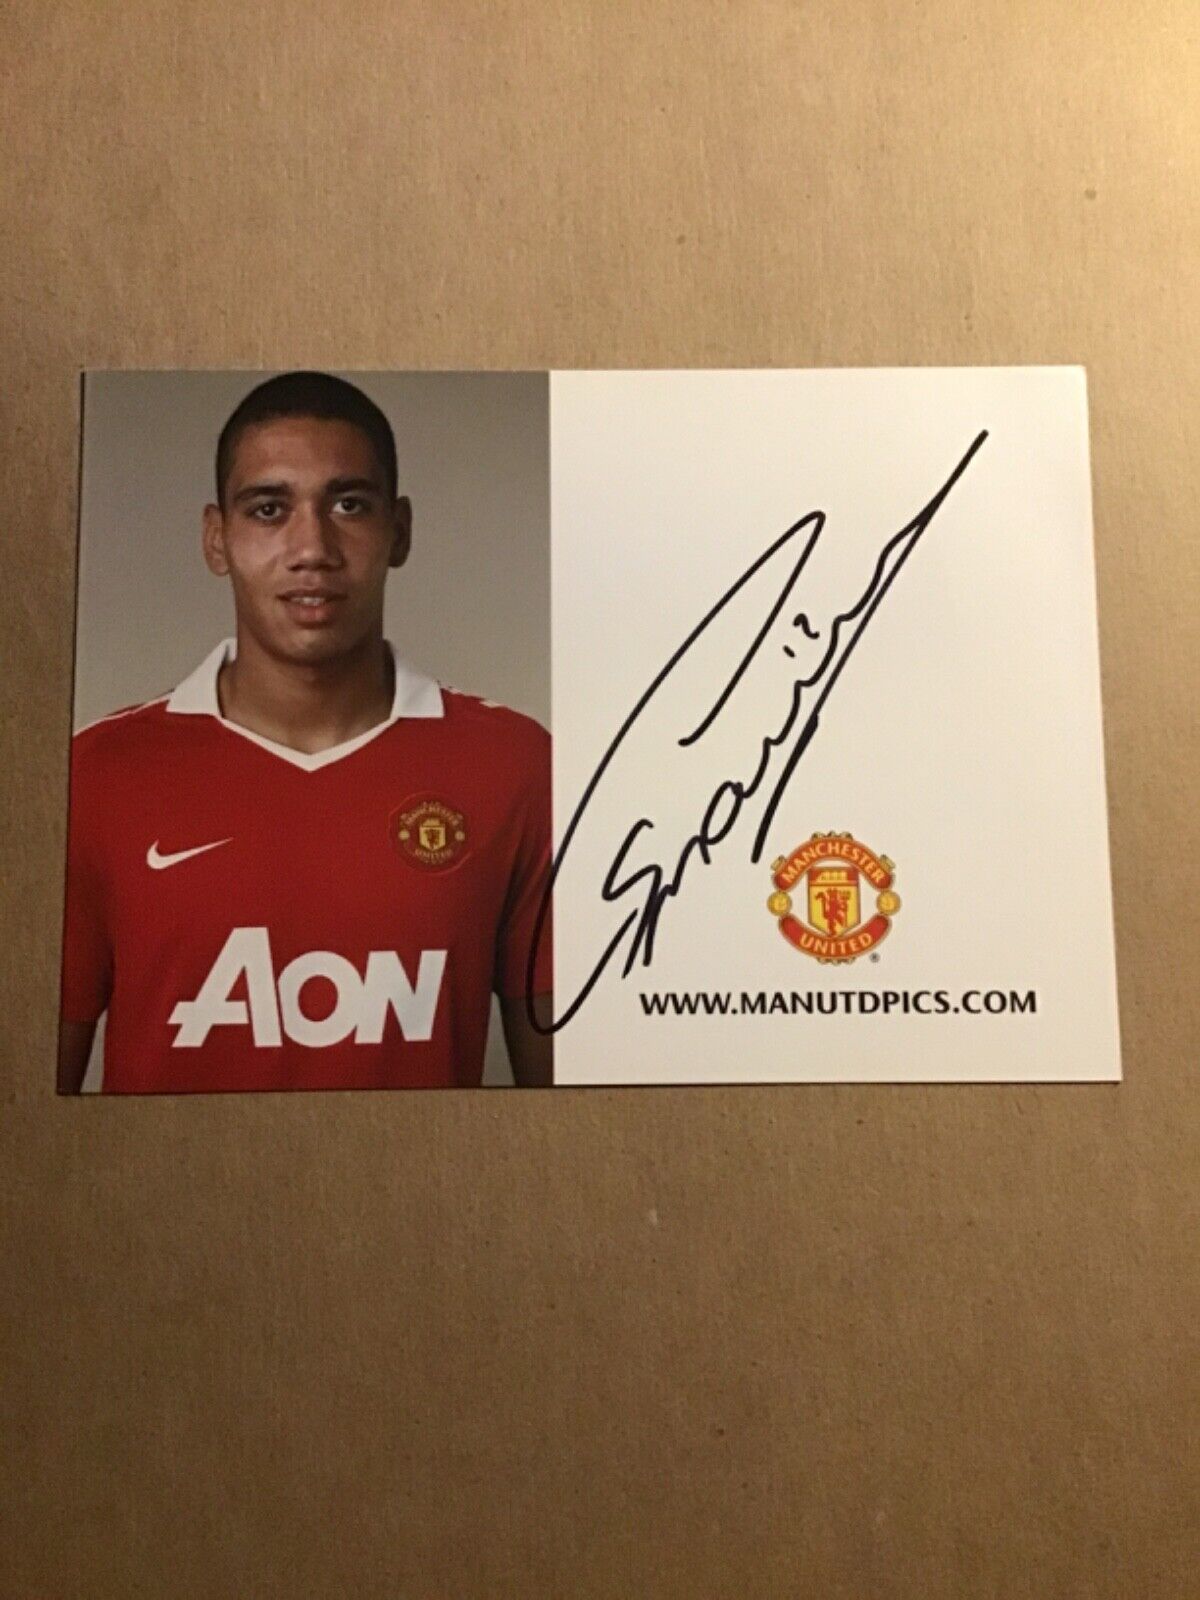 Chris Smalling, England 🏴󠁧󠁢󠁥󠁮󠁧󠁿 Manchester United 2010/11 hand signed